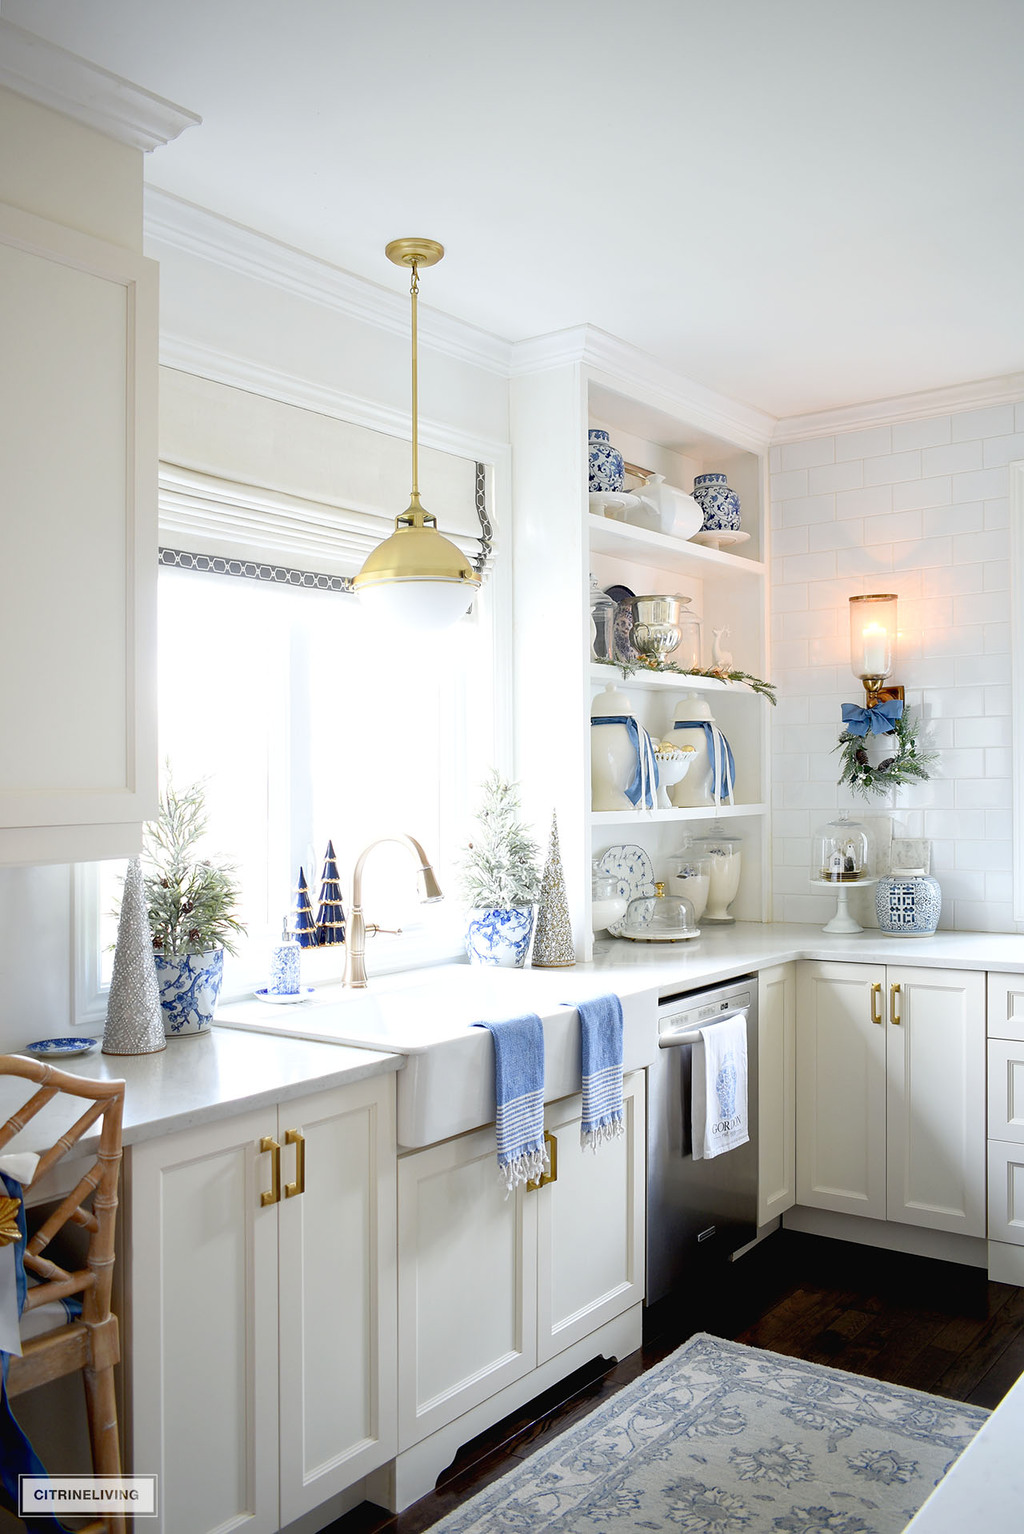 White kitchen farm sinks decorated for Christmas with blue and white accents and trees, open shelves are styled with a mix of white and gloss jars and blue and white accents.